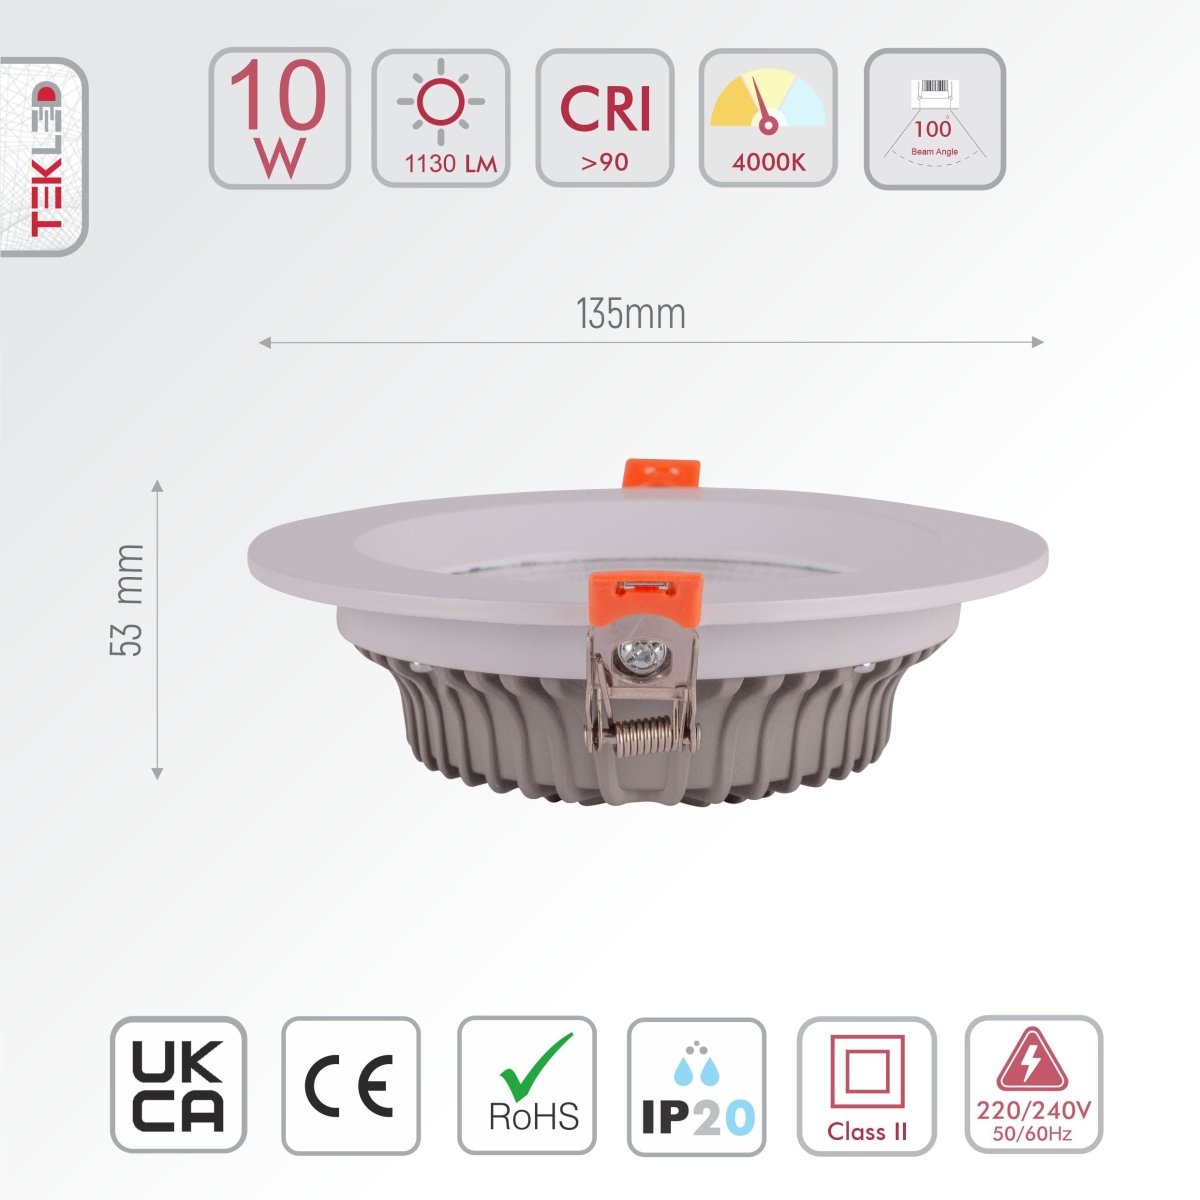 Size and specs of LED COB Recessed Downlight 10W Cool White 4000K White | TEKLED 165-03398